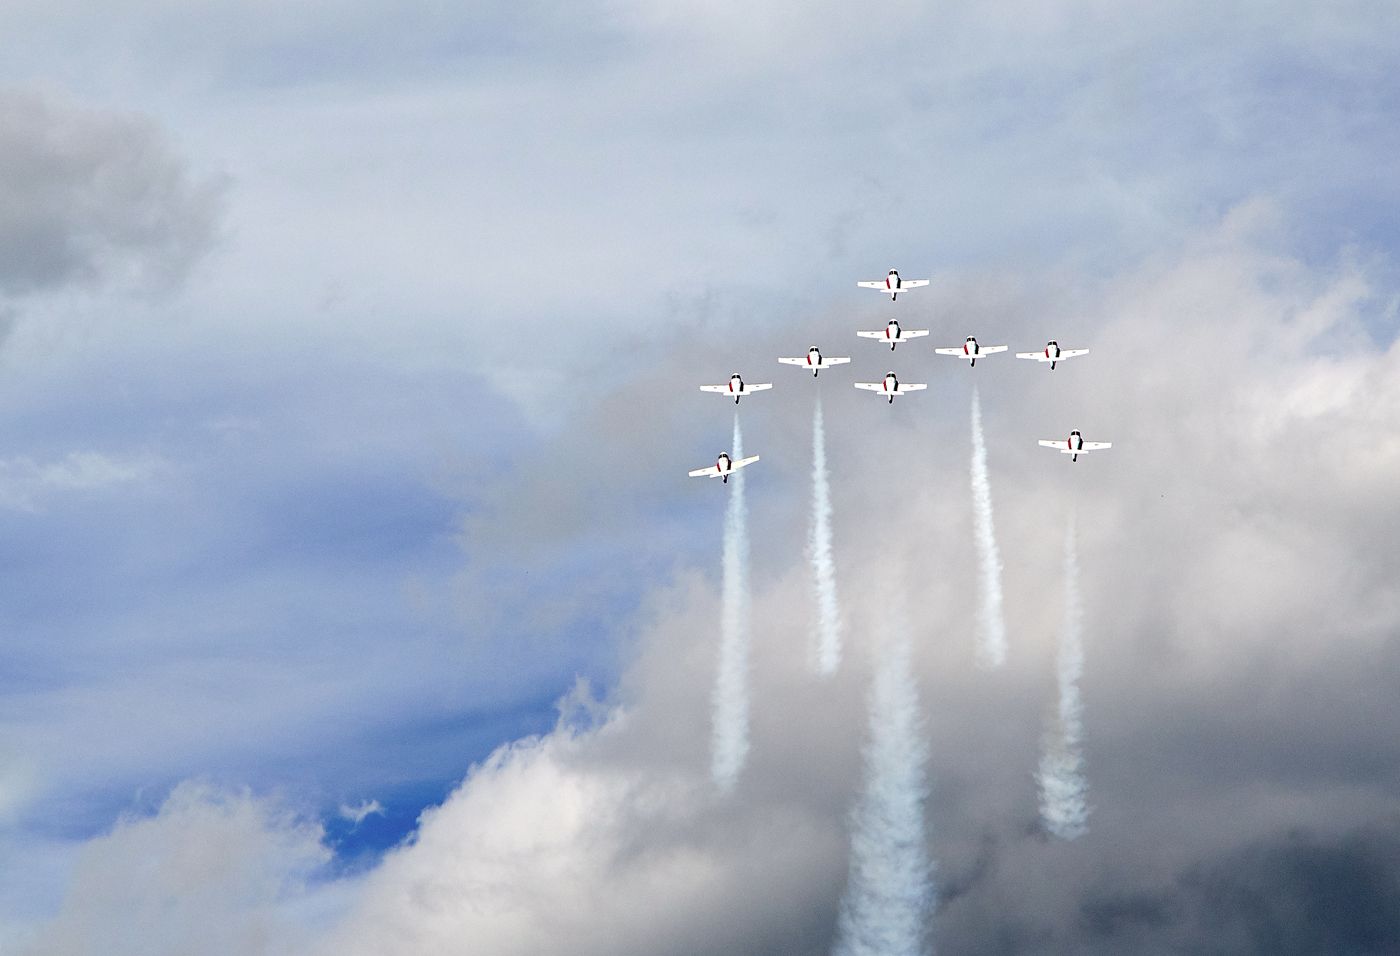 Canadian Forces Snowbirds Team at the Springbank Airshow